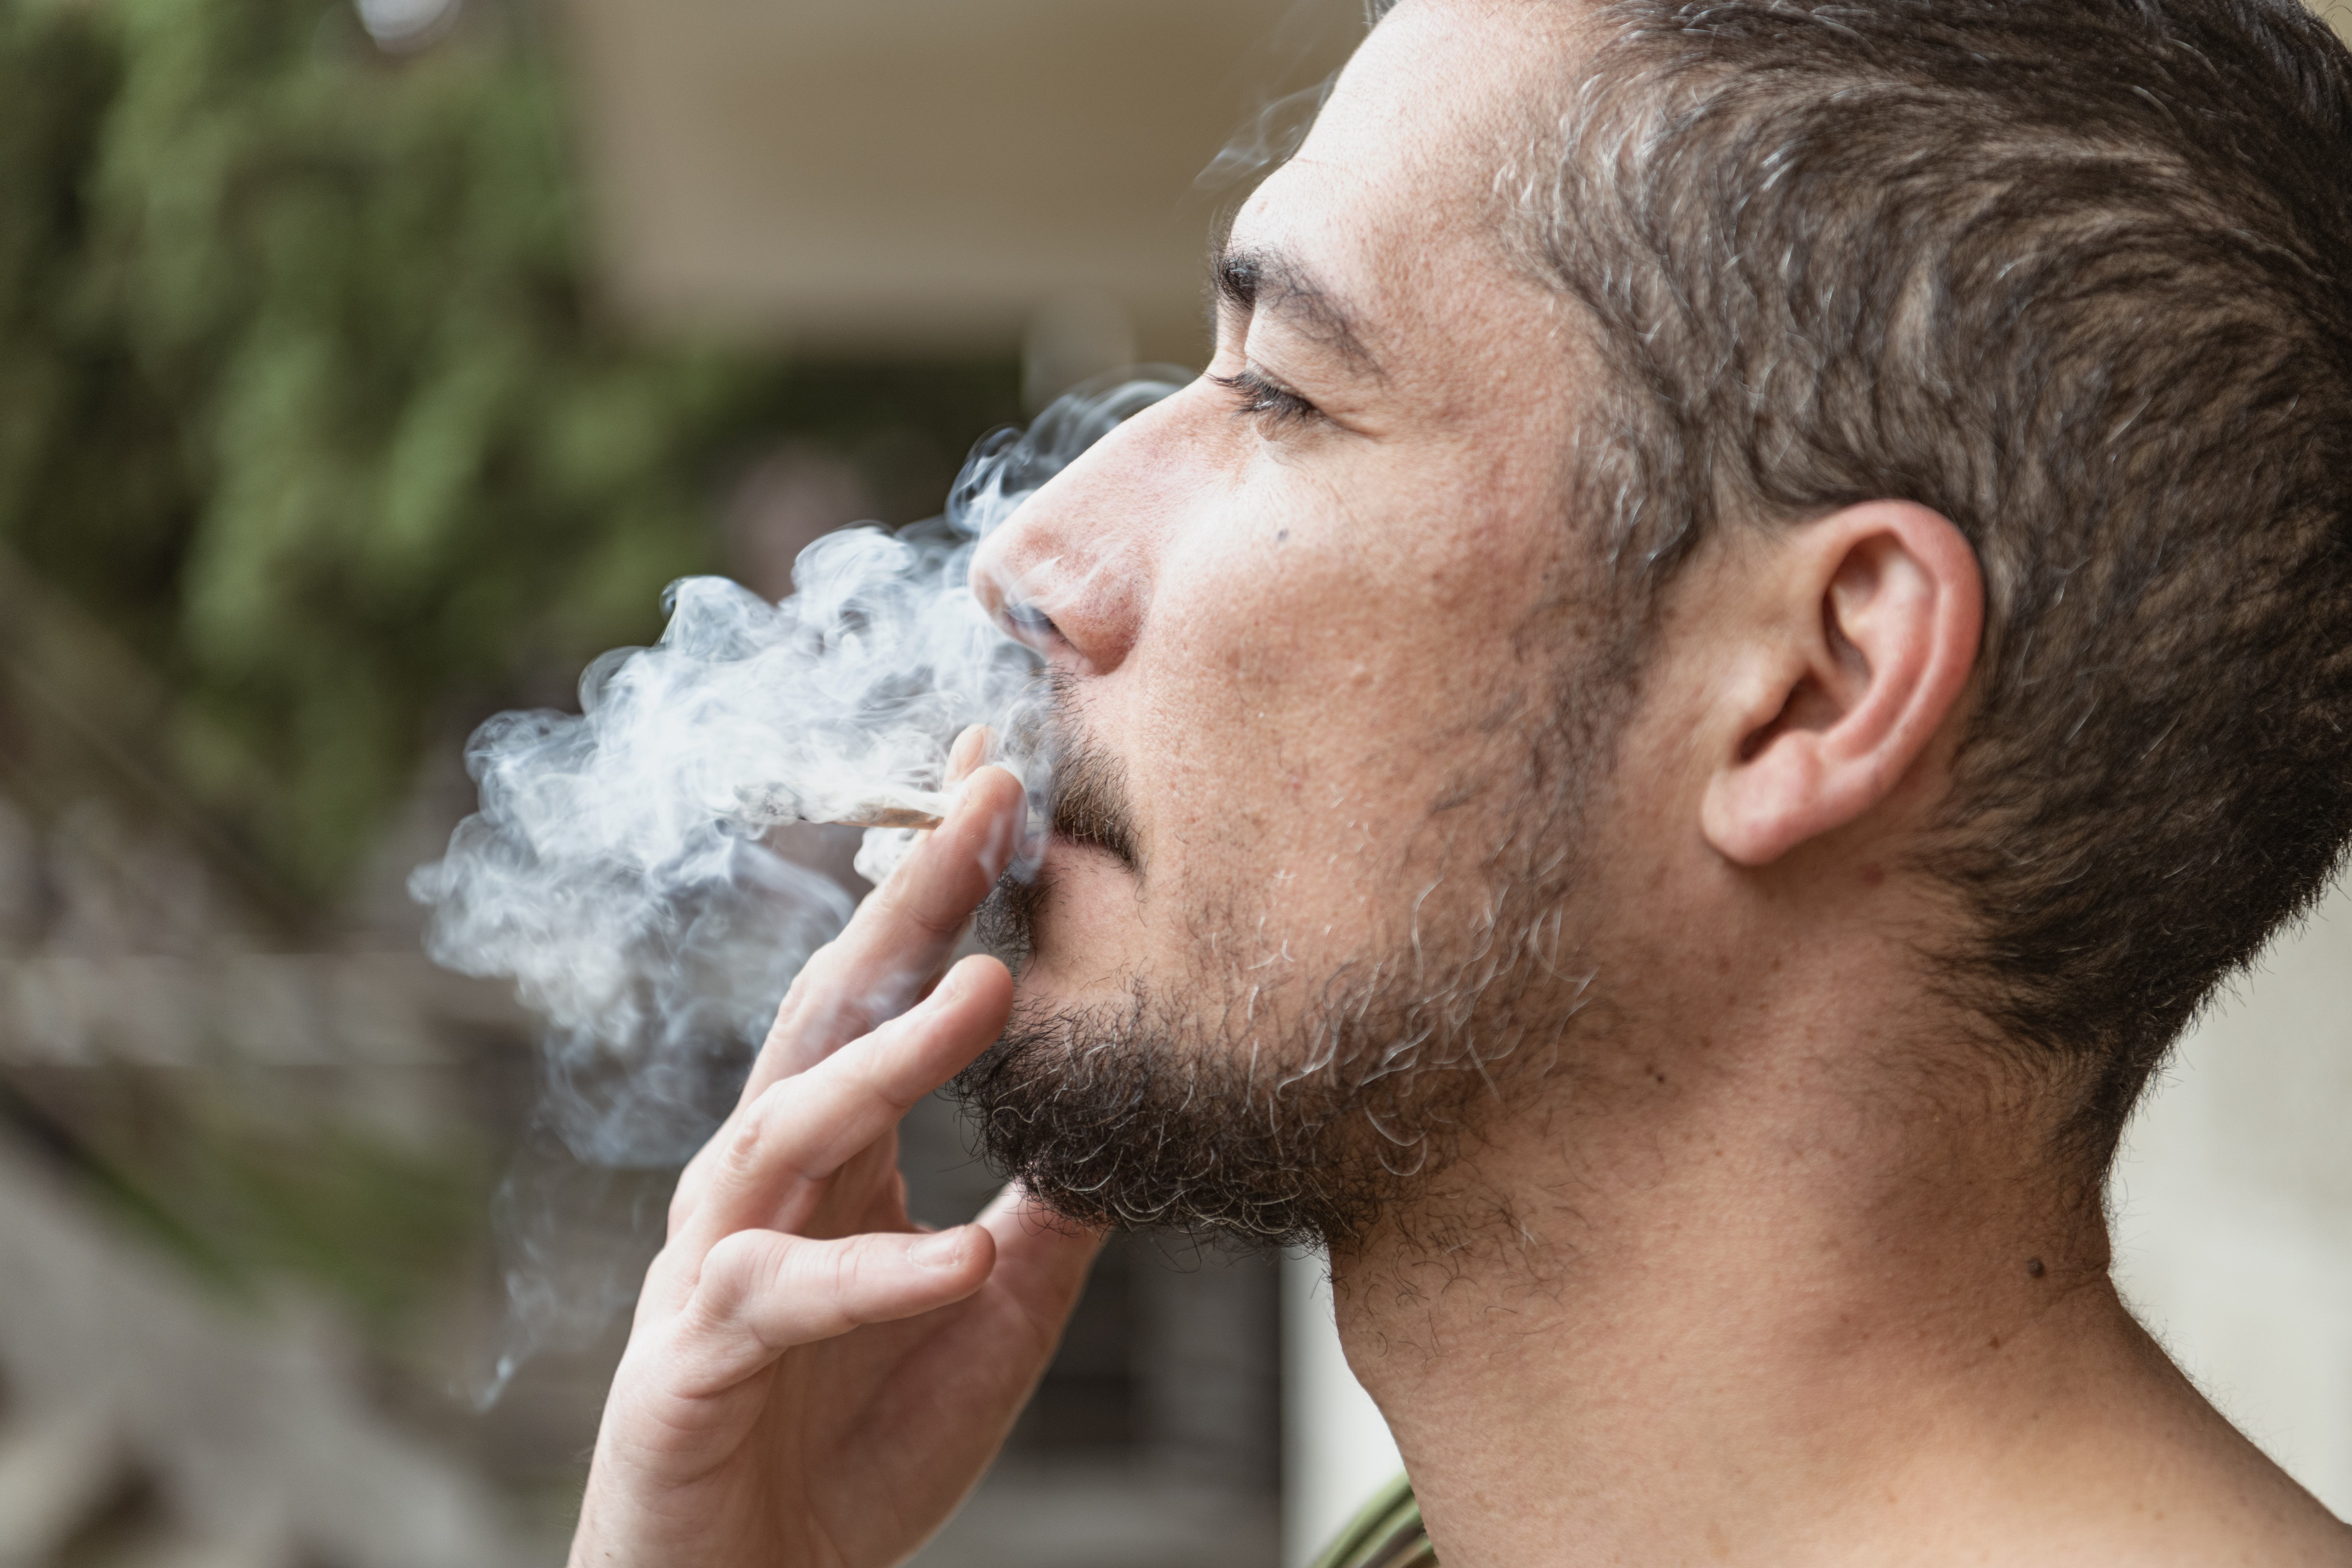 Encouraging News on Cannabis Smoke, Vaping and Lung Health